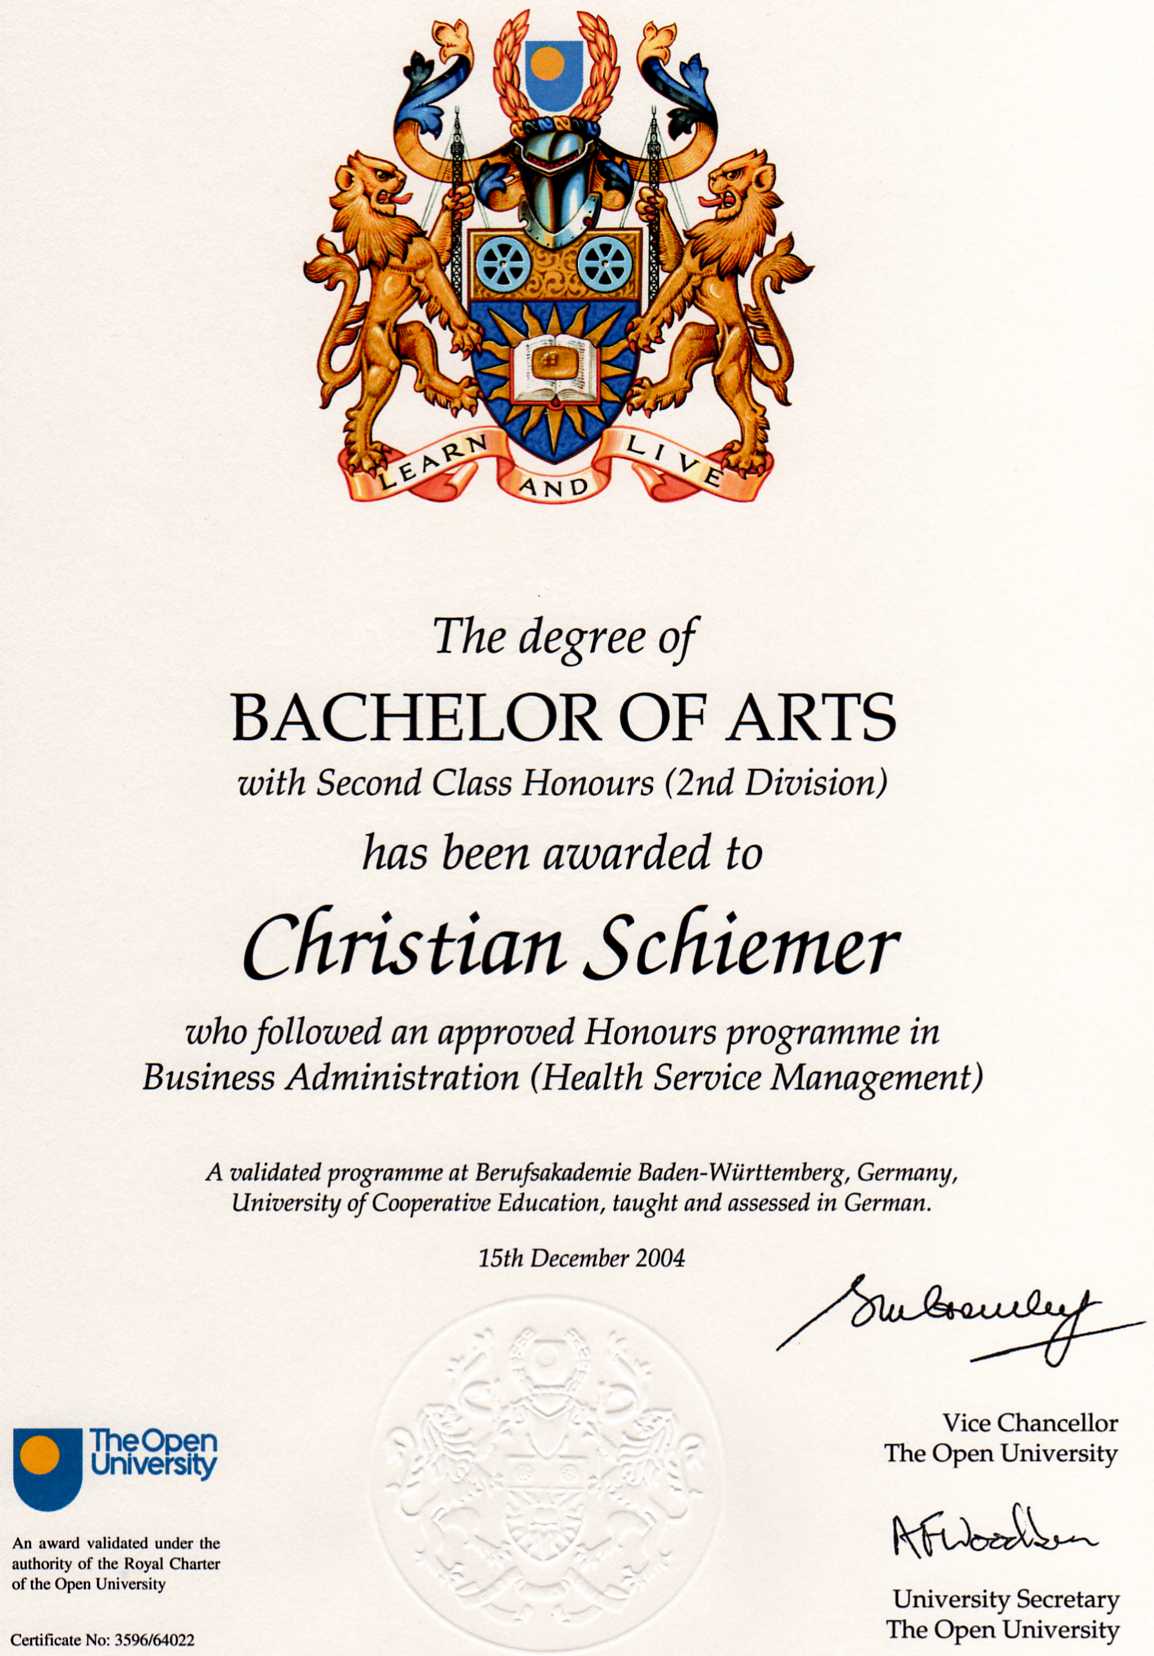 How to get a bachelor of arts degree